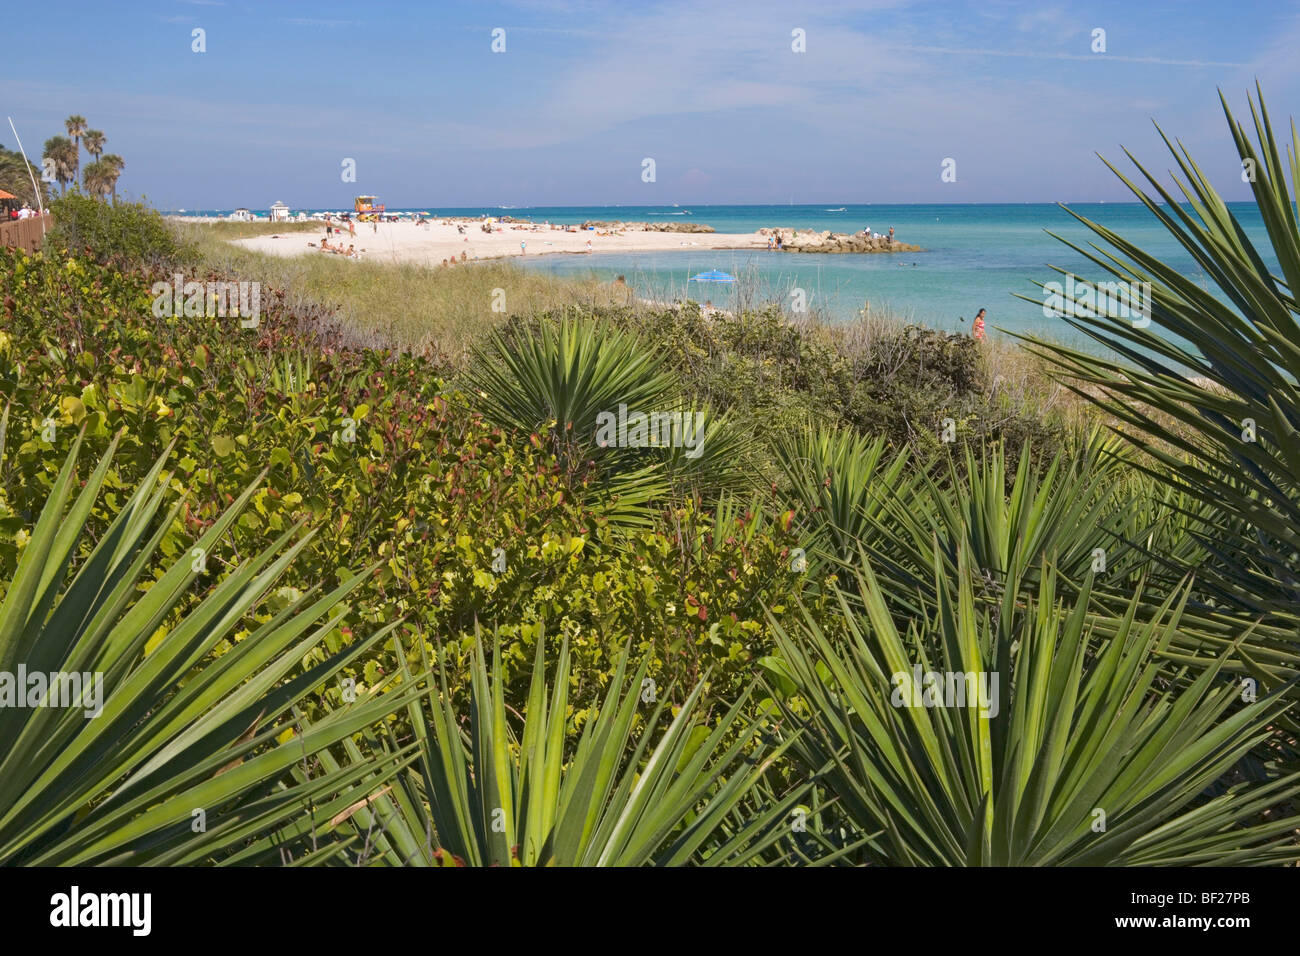 View over palm trees at beach in the sunlight, Boardwalk District, Miami Beach, Florida, USA Stock Photo